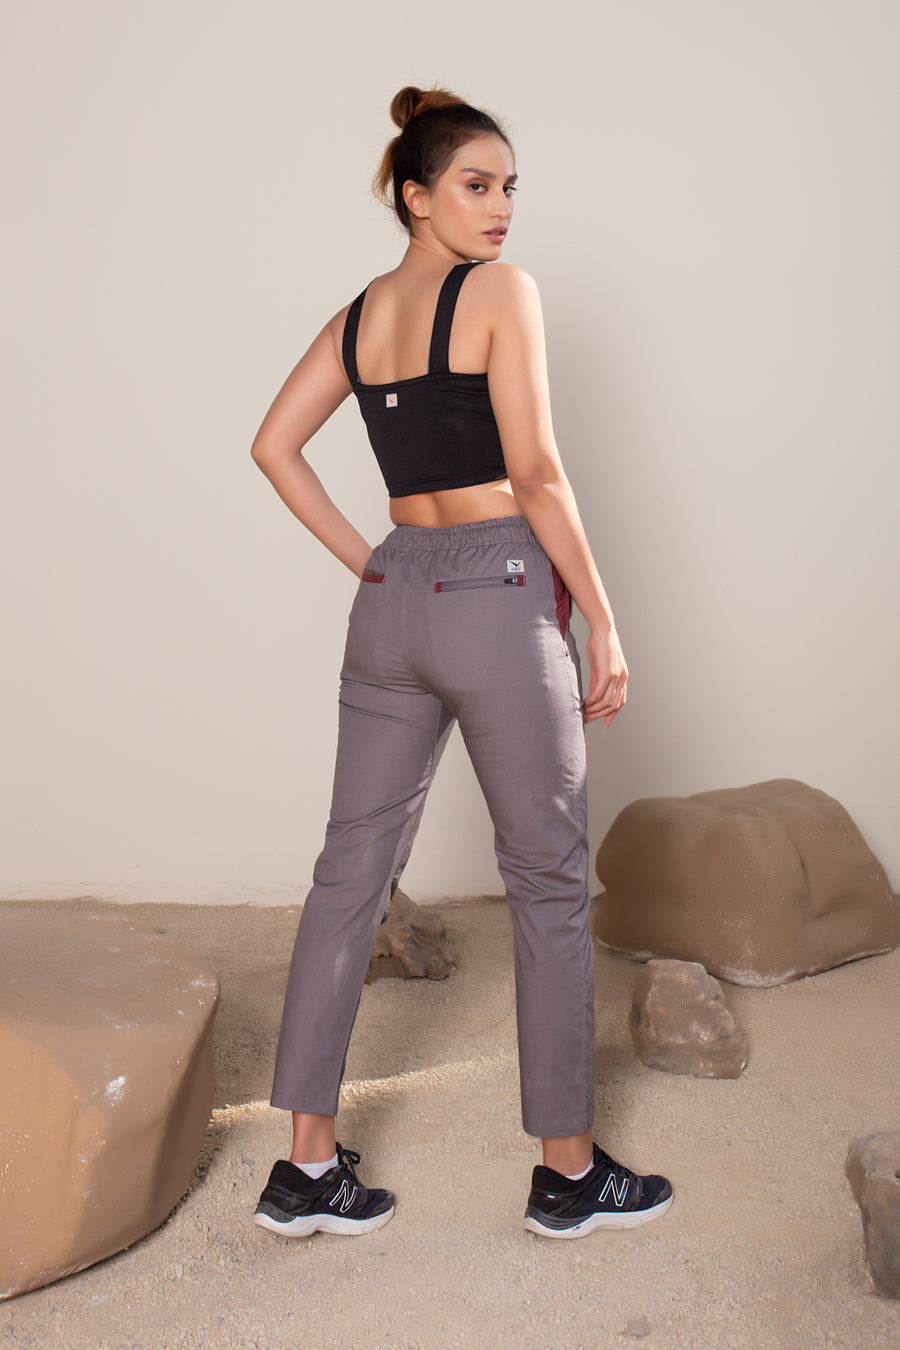 Women's Vera Crop in Black | VOLO Apparel | The perfect athletic crop top made with a four way stretch bamboo fiber blend. Double lined and naturally odor resistant and antimicrobial. The Vera bamboo crop is reinforced stitched, the bamboo fiber comes with its own climate control properties, making the tops more breathable in the heat and more insulating in the cold.